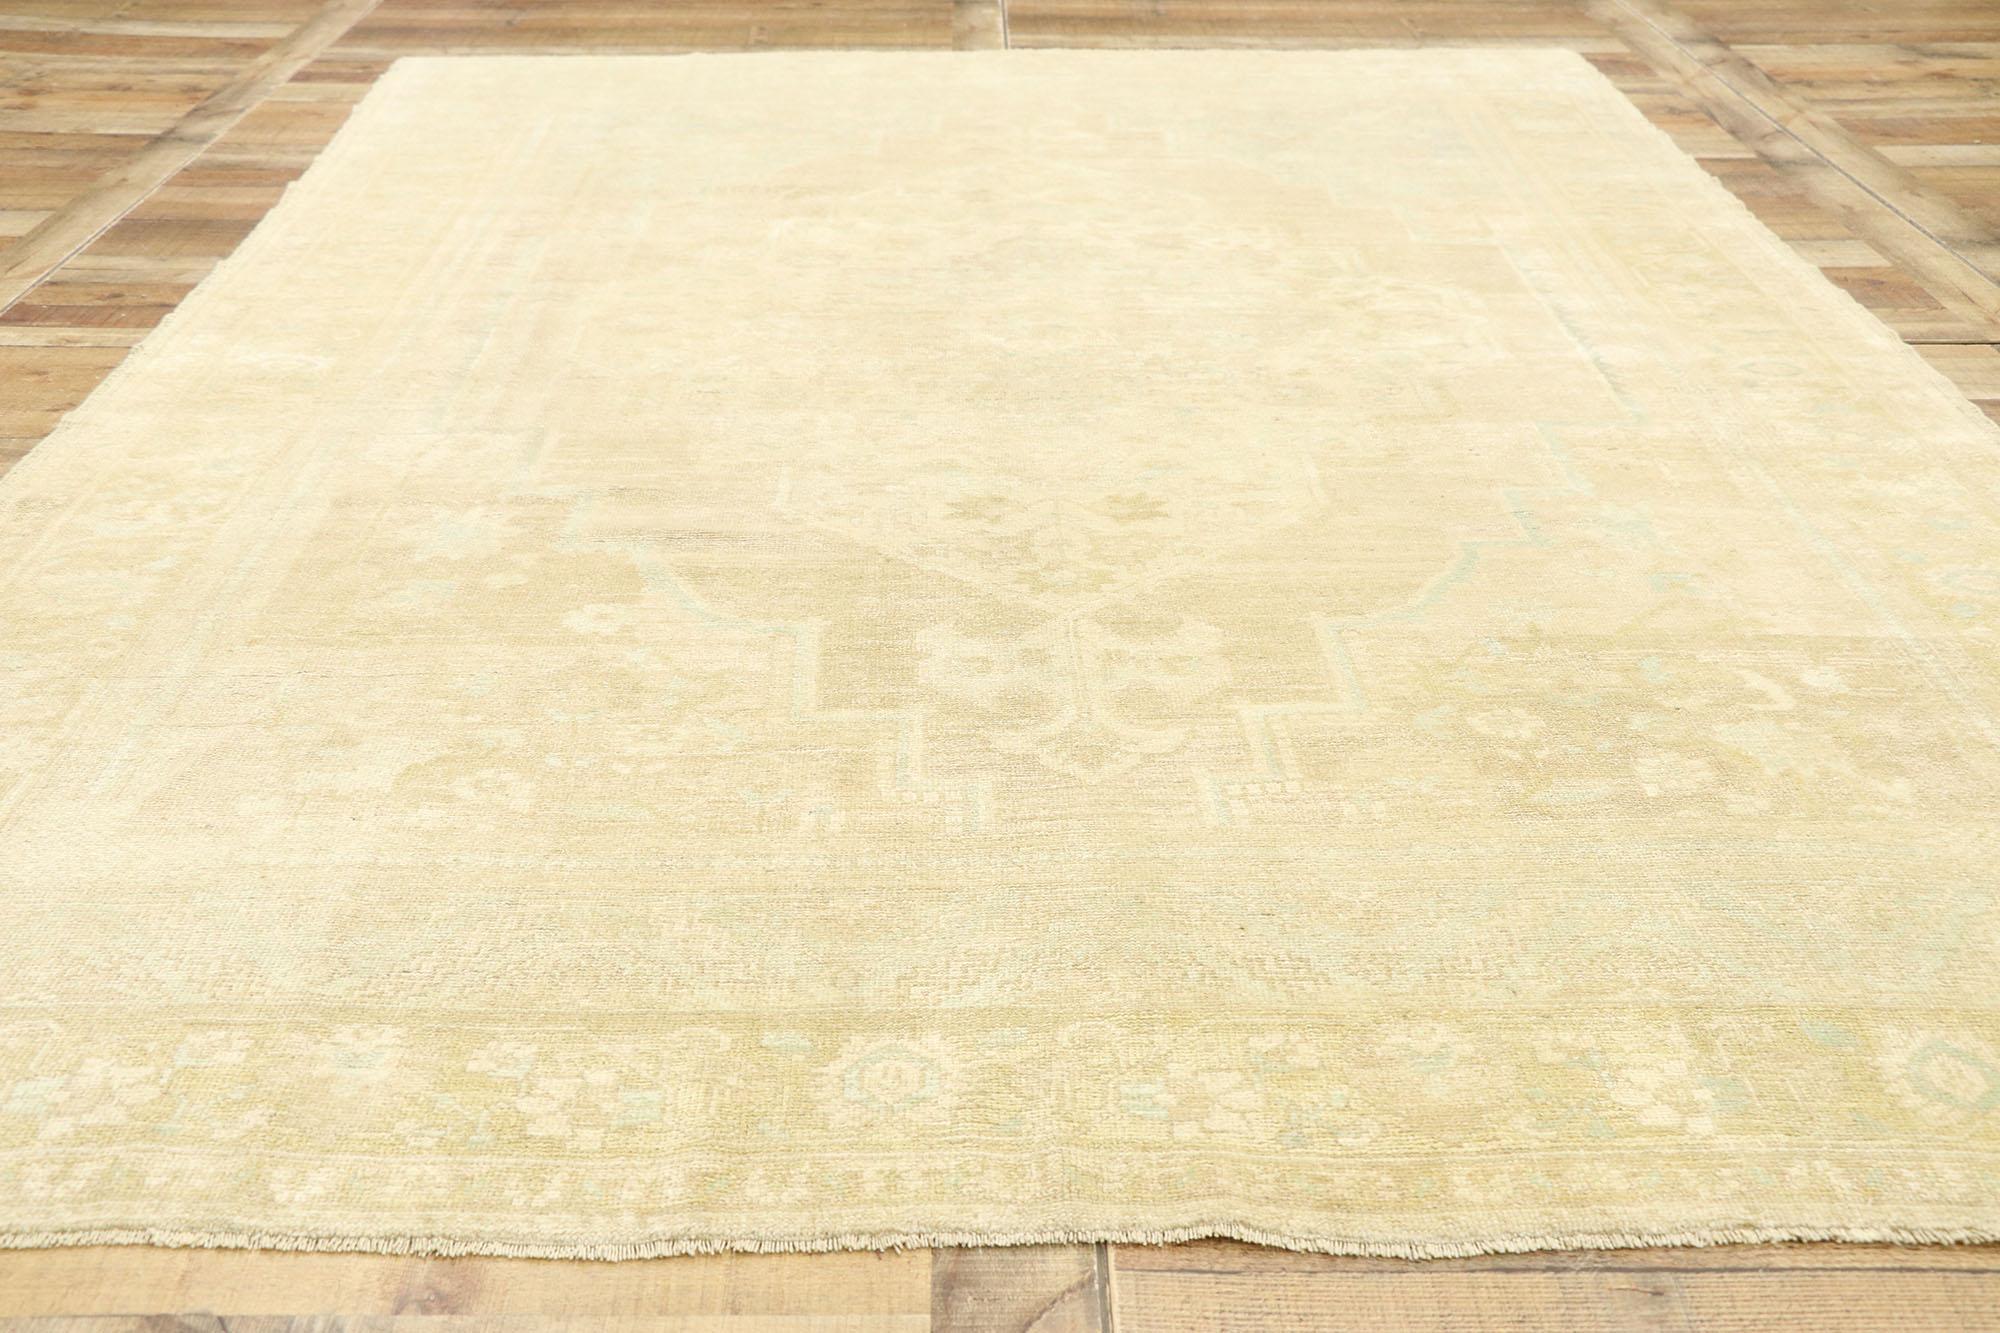 Wool Vintage Turkish Oushak Rug with Muted Hues and Monochromatic Mission Style